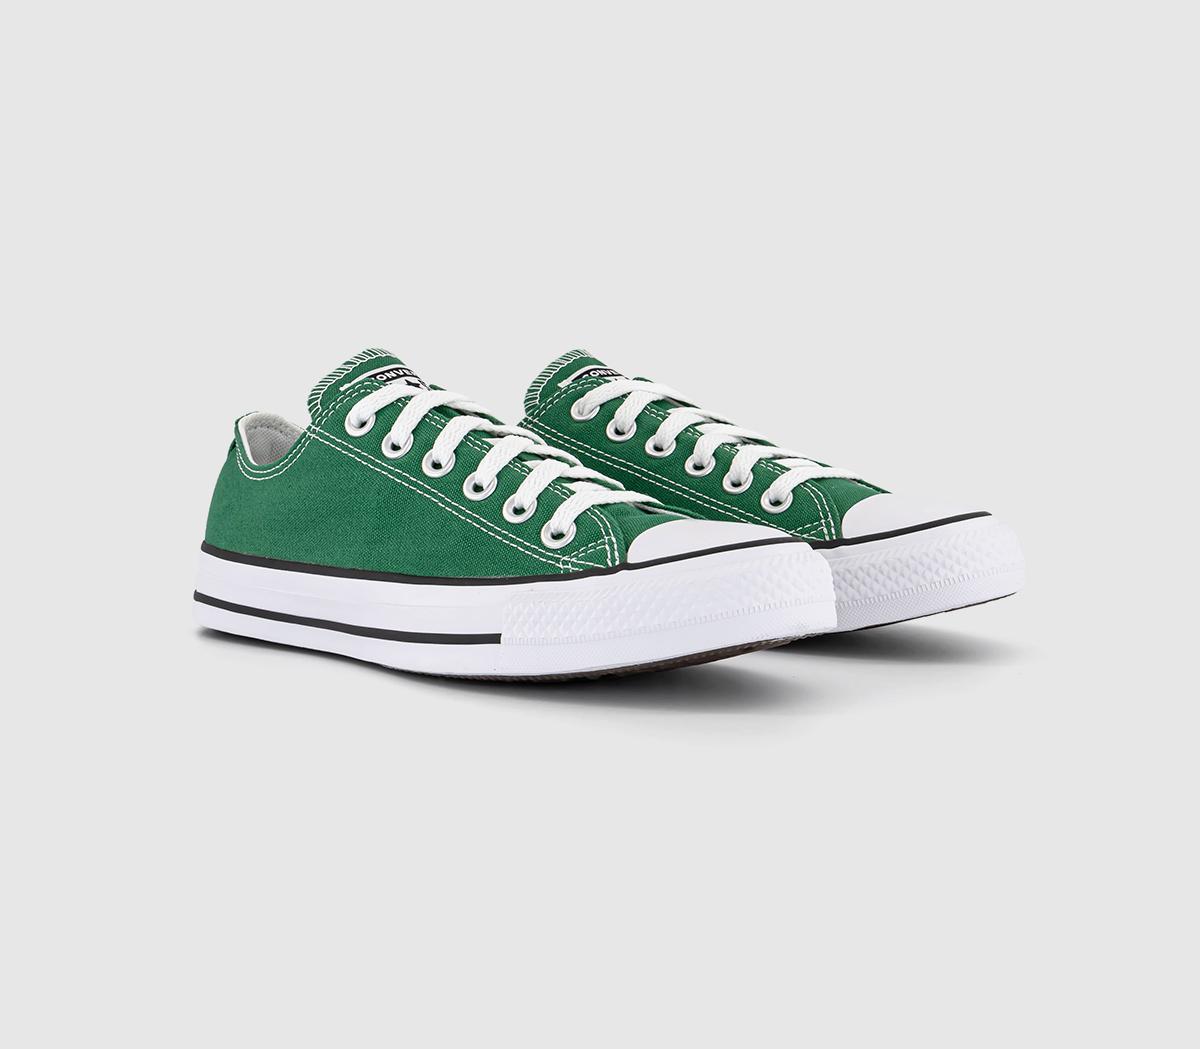 Converse All Star Low Trainers Amazon Green, 5